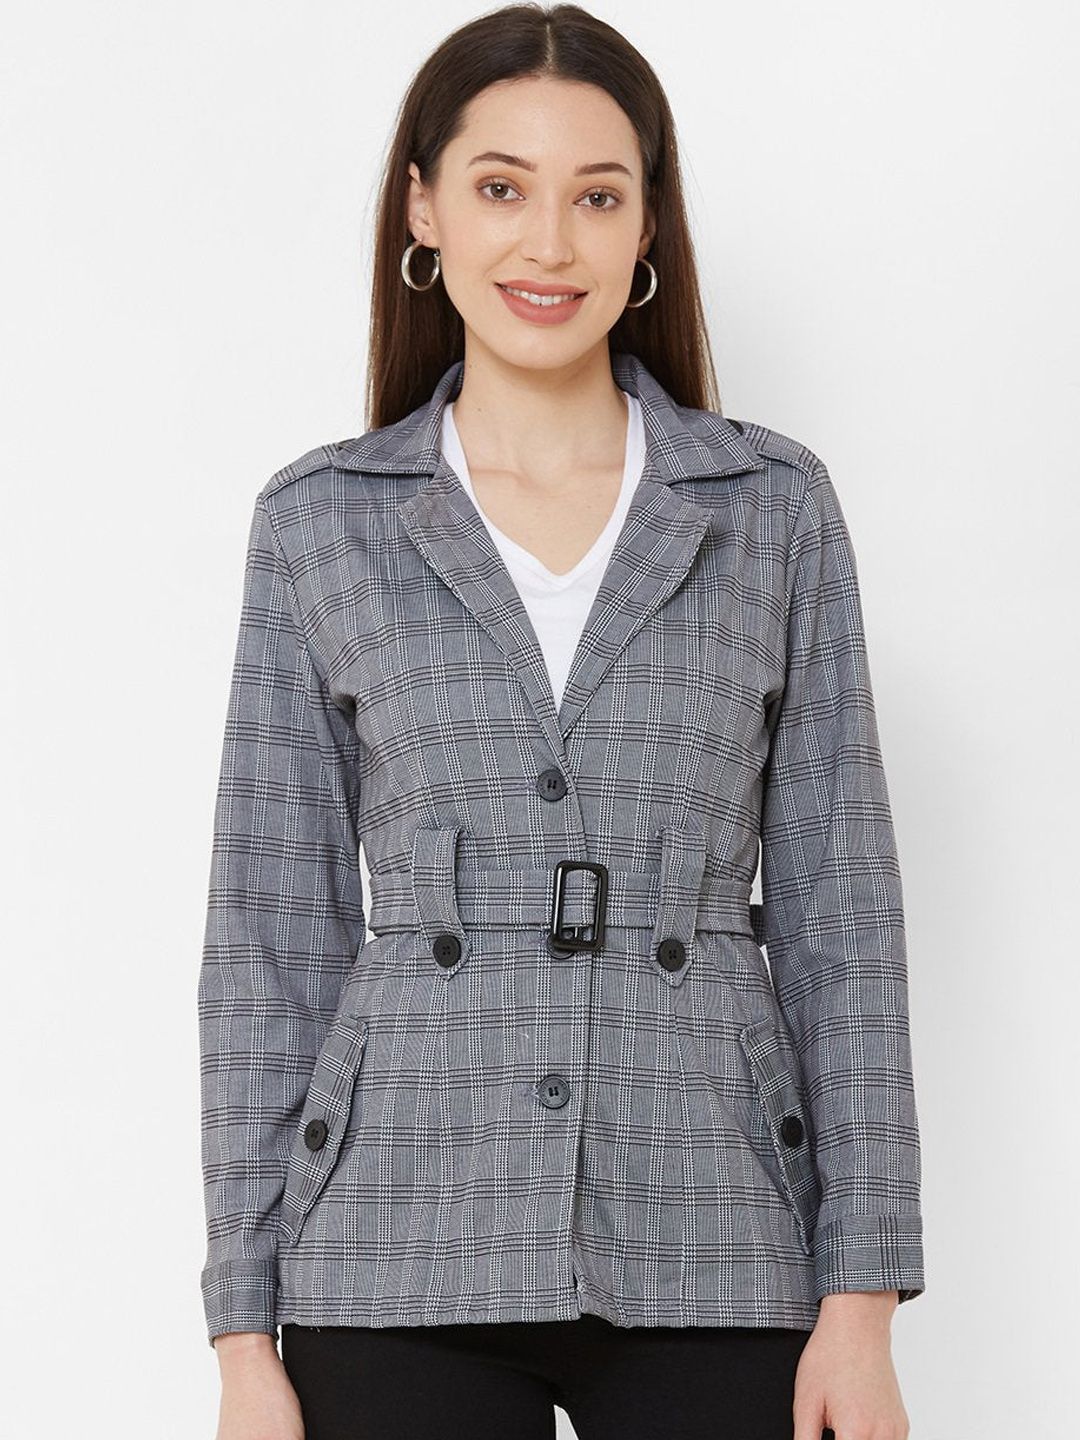 Kraus Jeans Women Grey Checked Longline Tailored Jacket Price in India